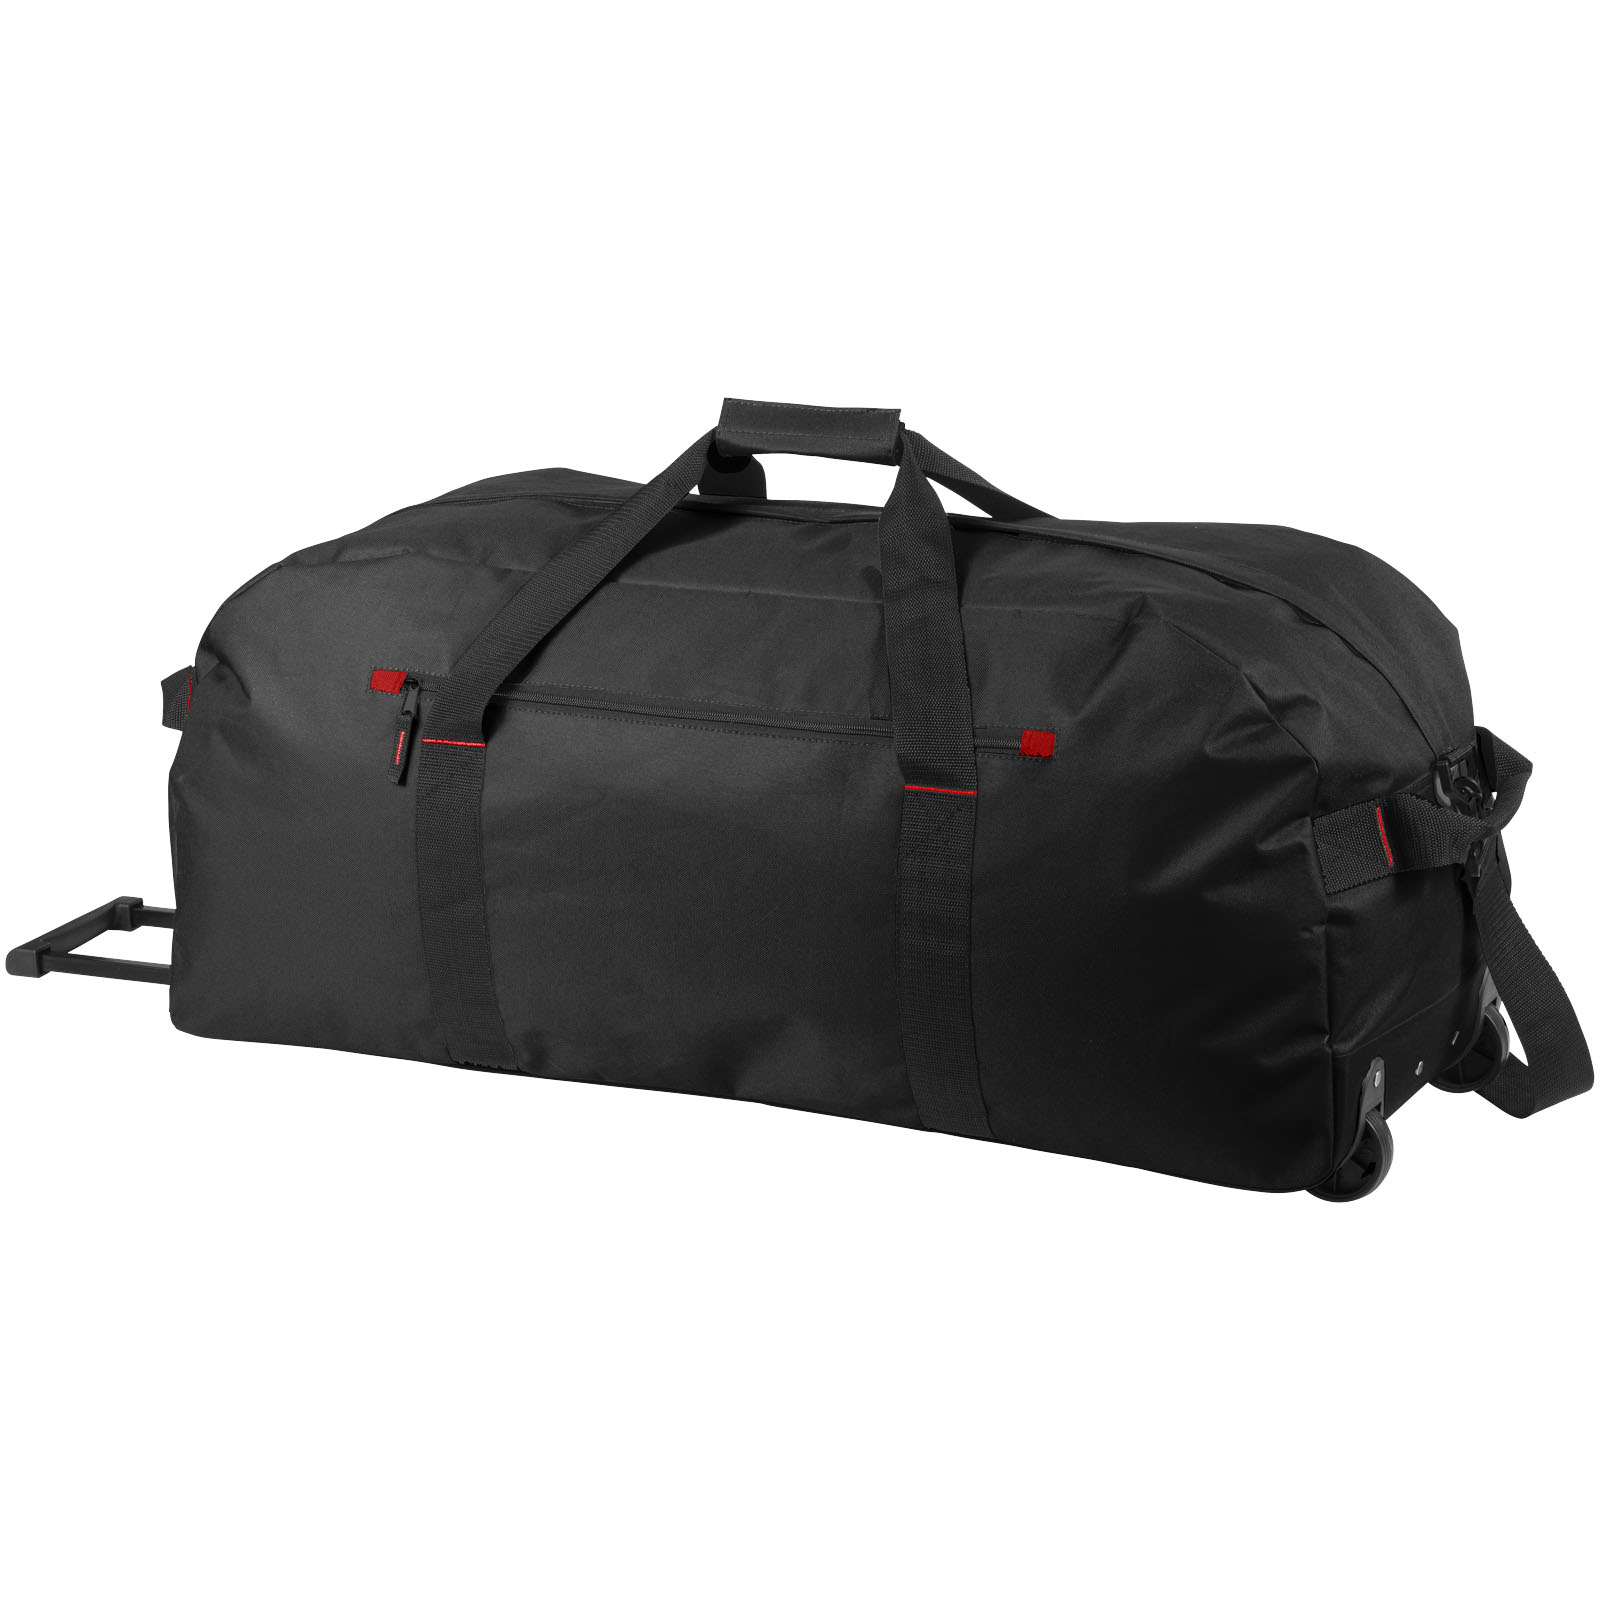 Bags - Vancouver trolley travel bag 75L